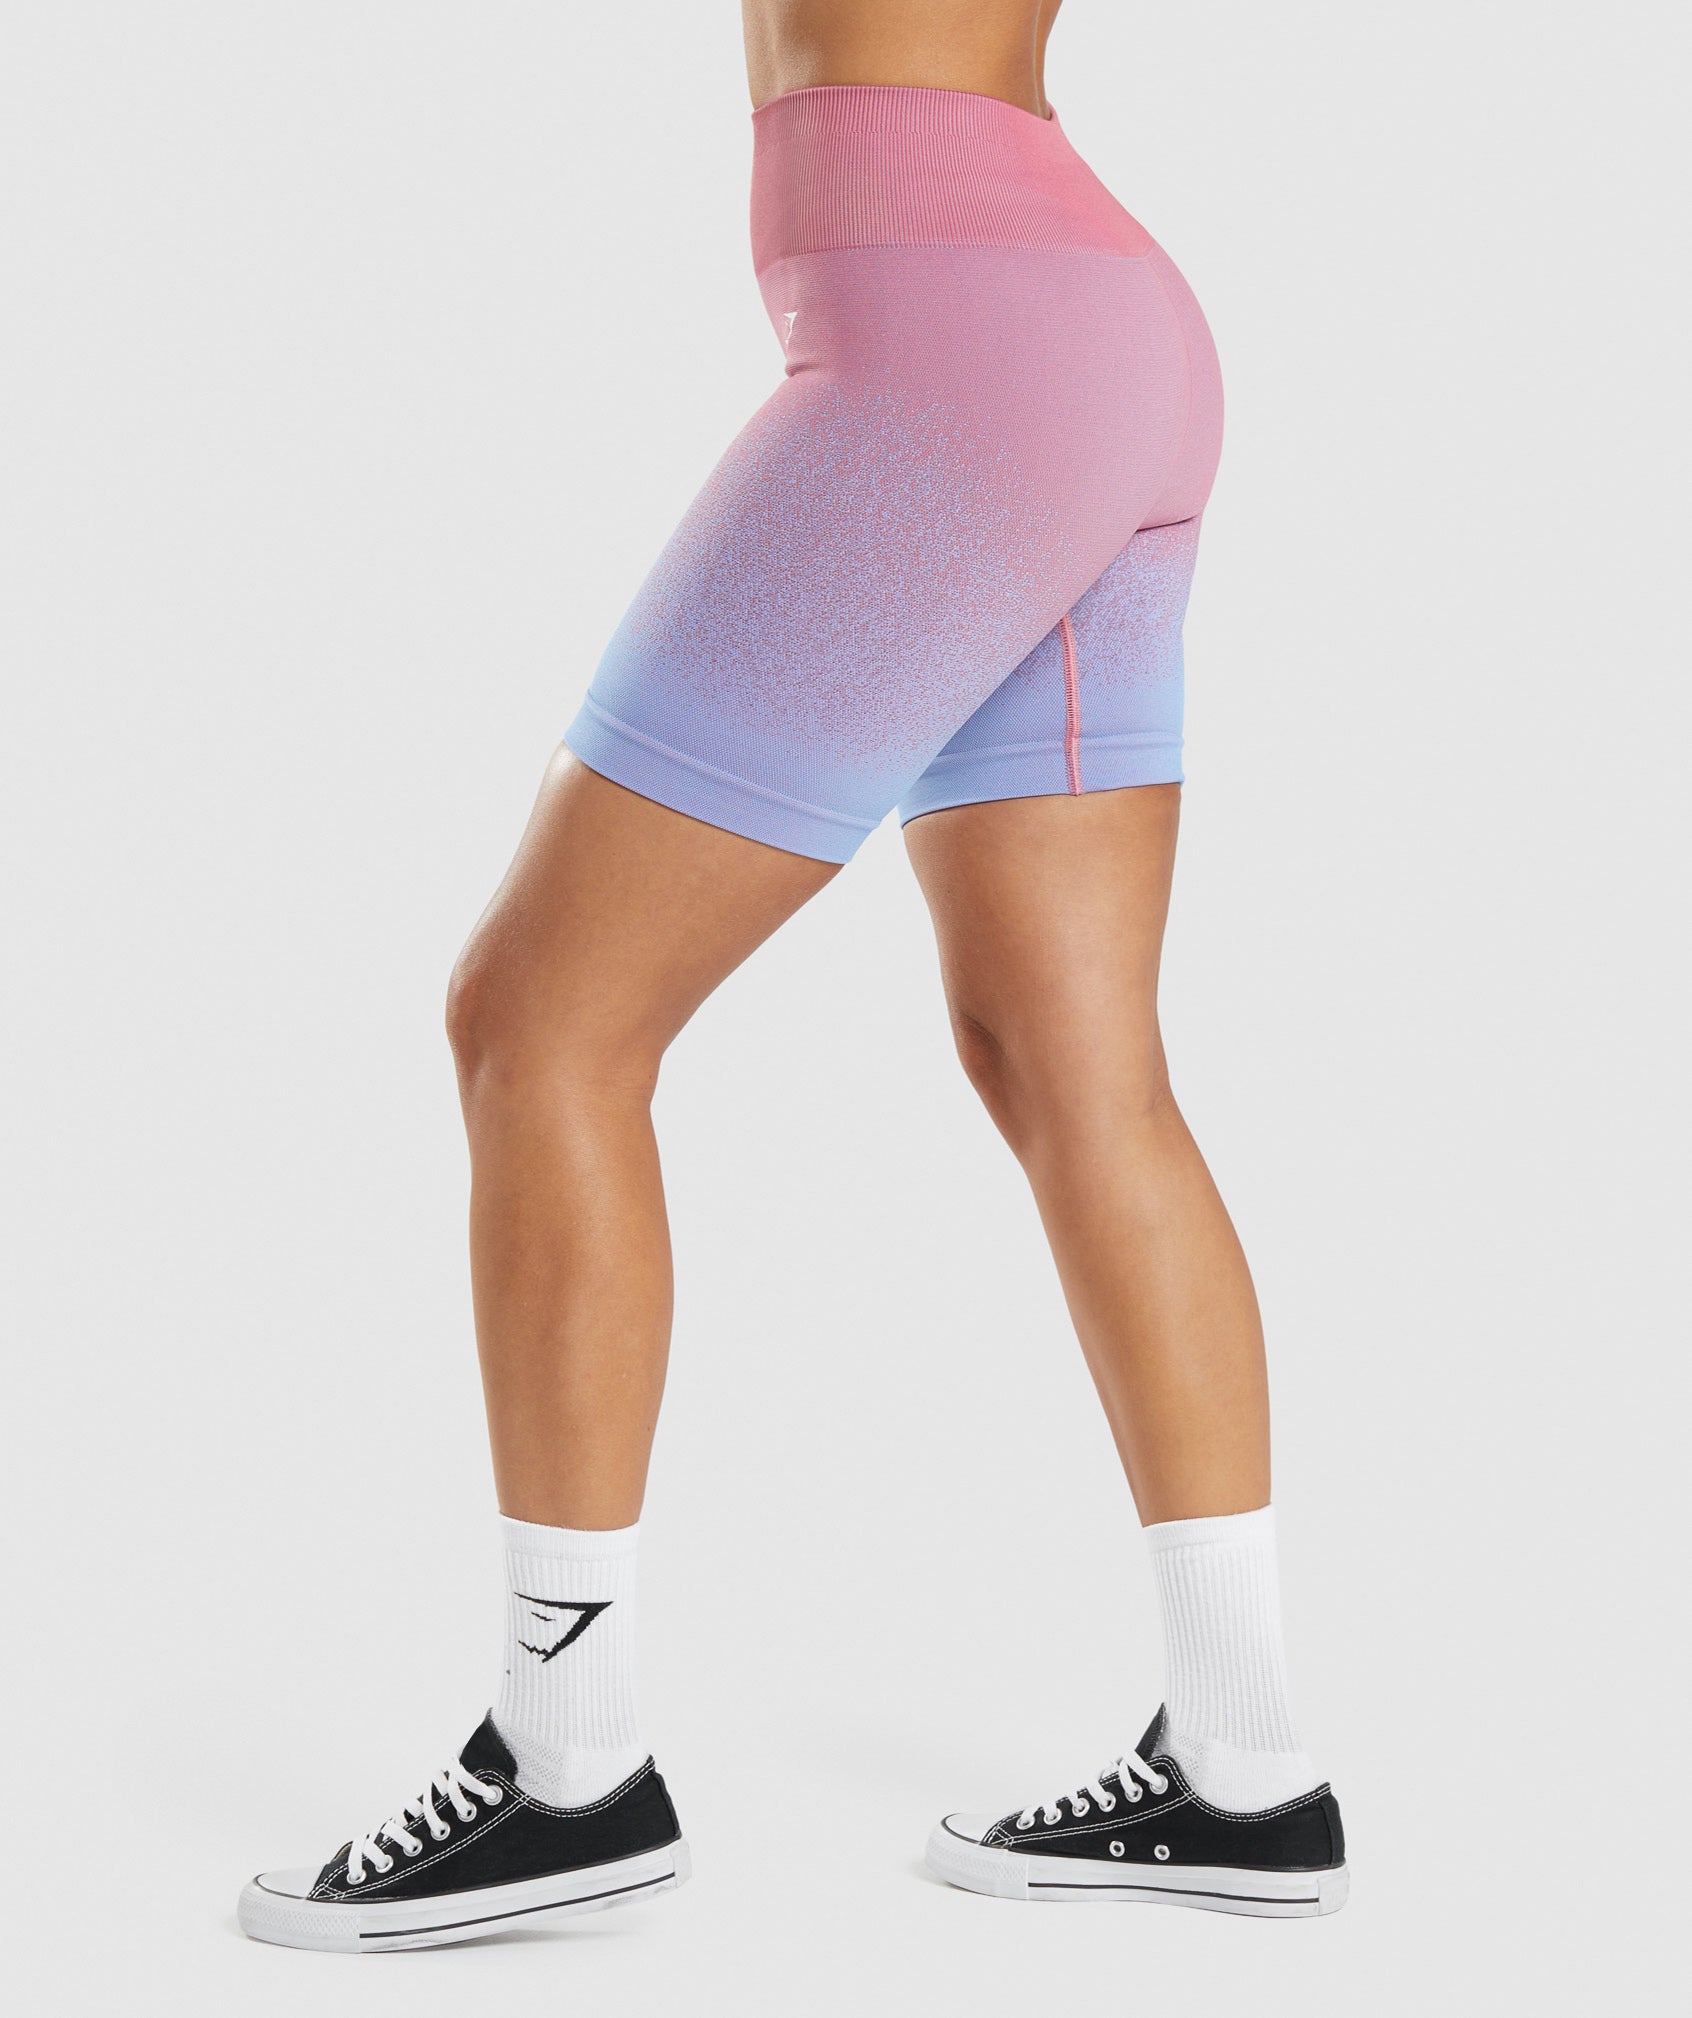 Adapt Ombre Seamless Cycling Shorts in Rose Pink/Light Blue - view 3